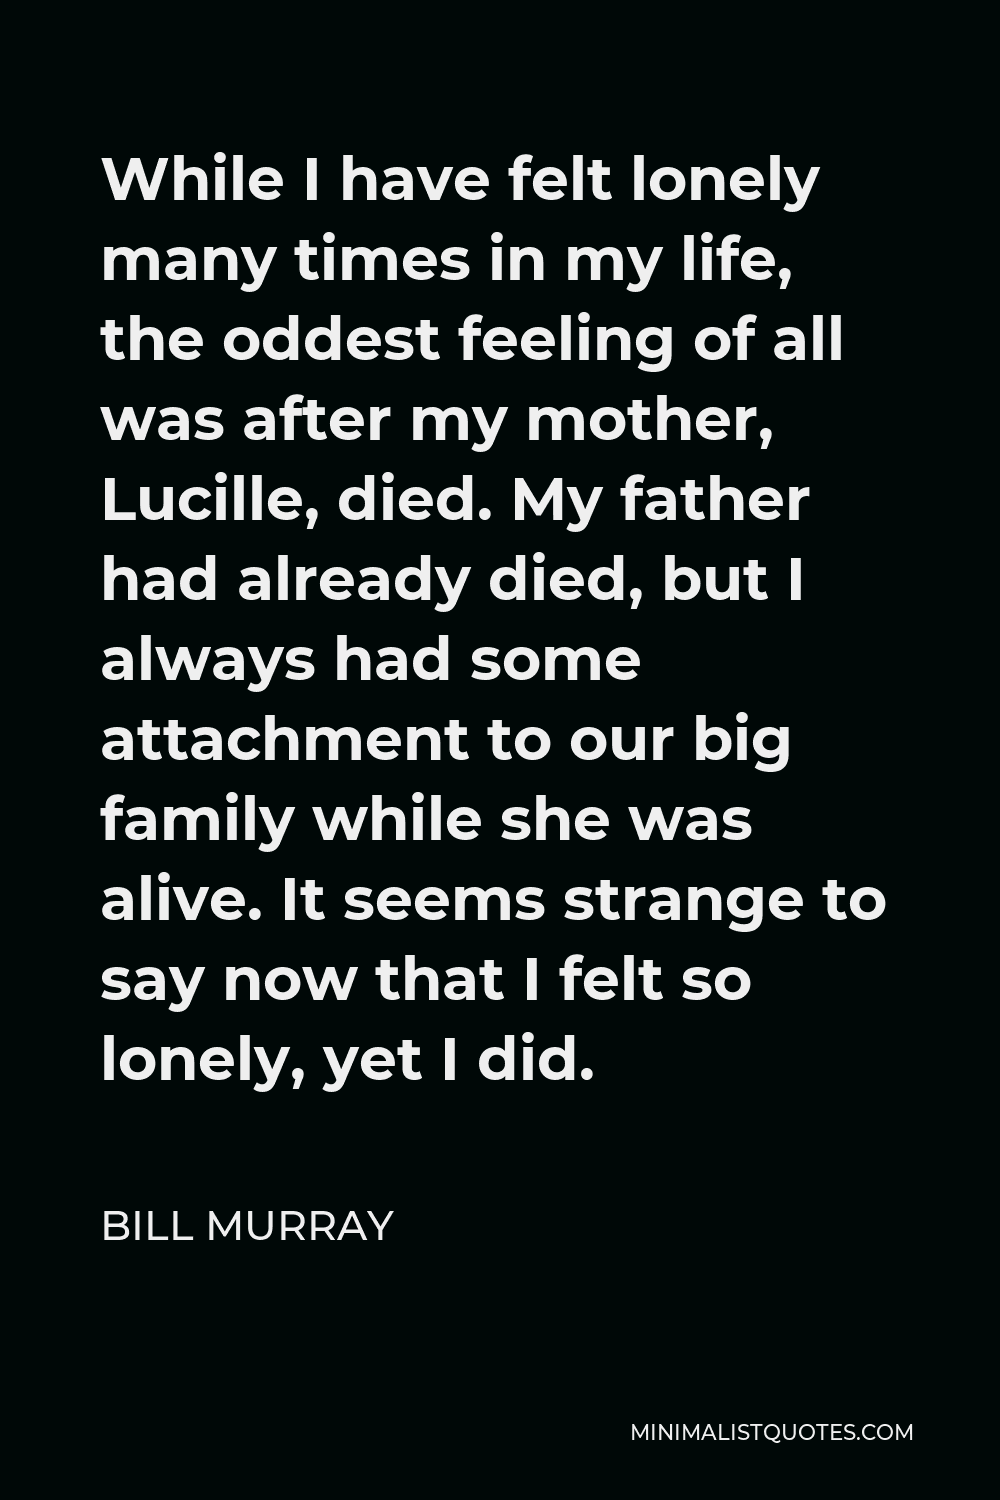 Bill Murray Quote - While I have felt lonely many times in my life, the oddest feeling of all was after my mother, Lucille, died. My father had already died, but I always had some attachment to our big family while she was alive. It seems strange to say now that I felt so lonely, yet I did.